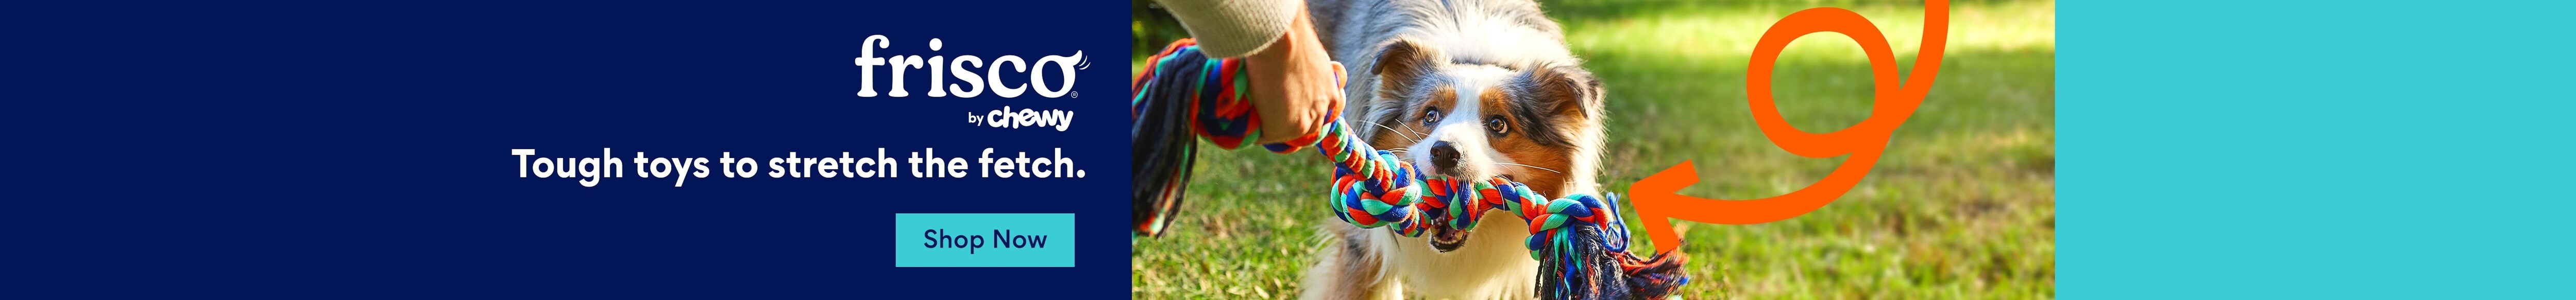 Frisco by Chewy. Tough toys to stretch the fetch. Shop now.